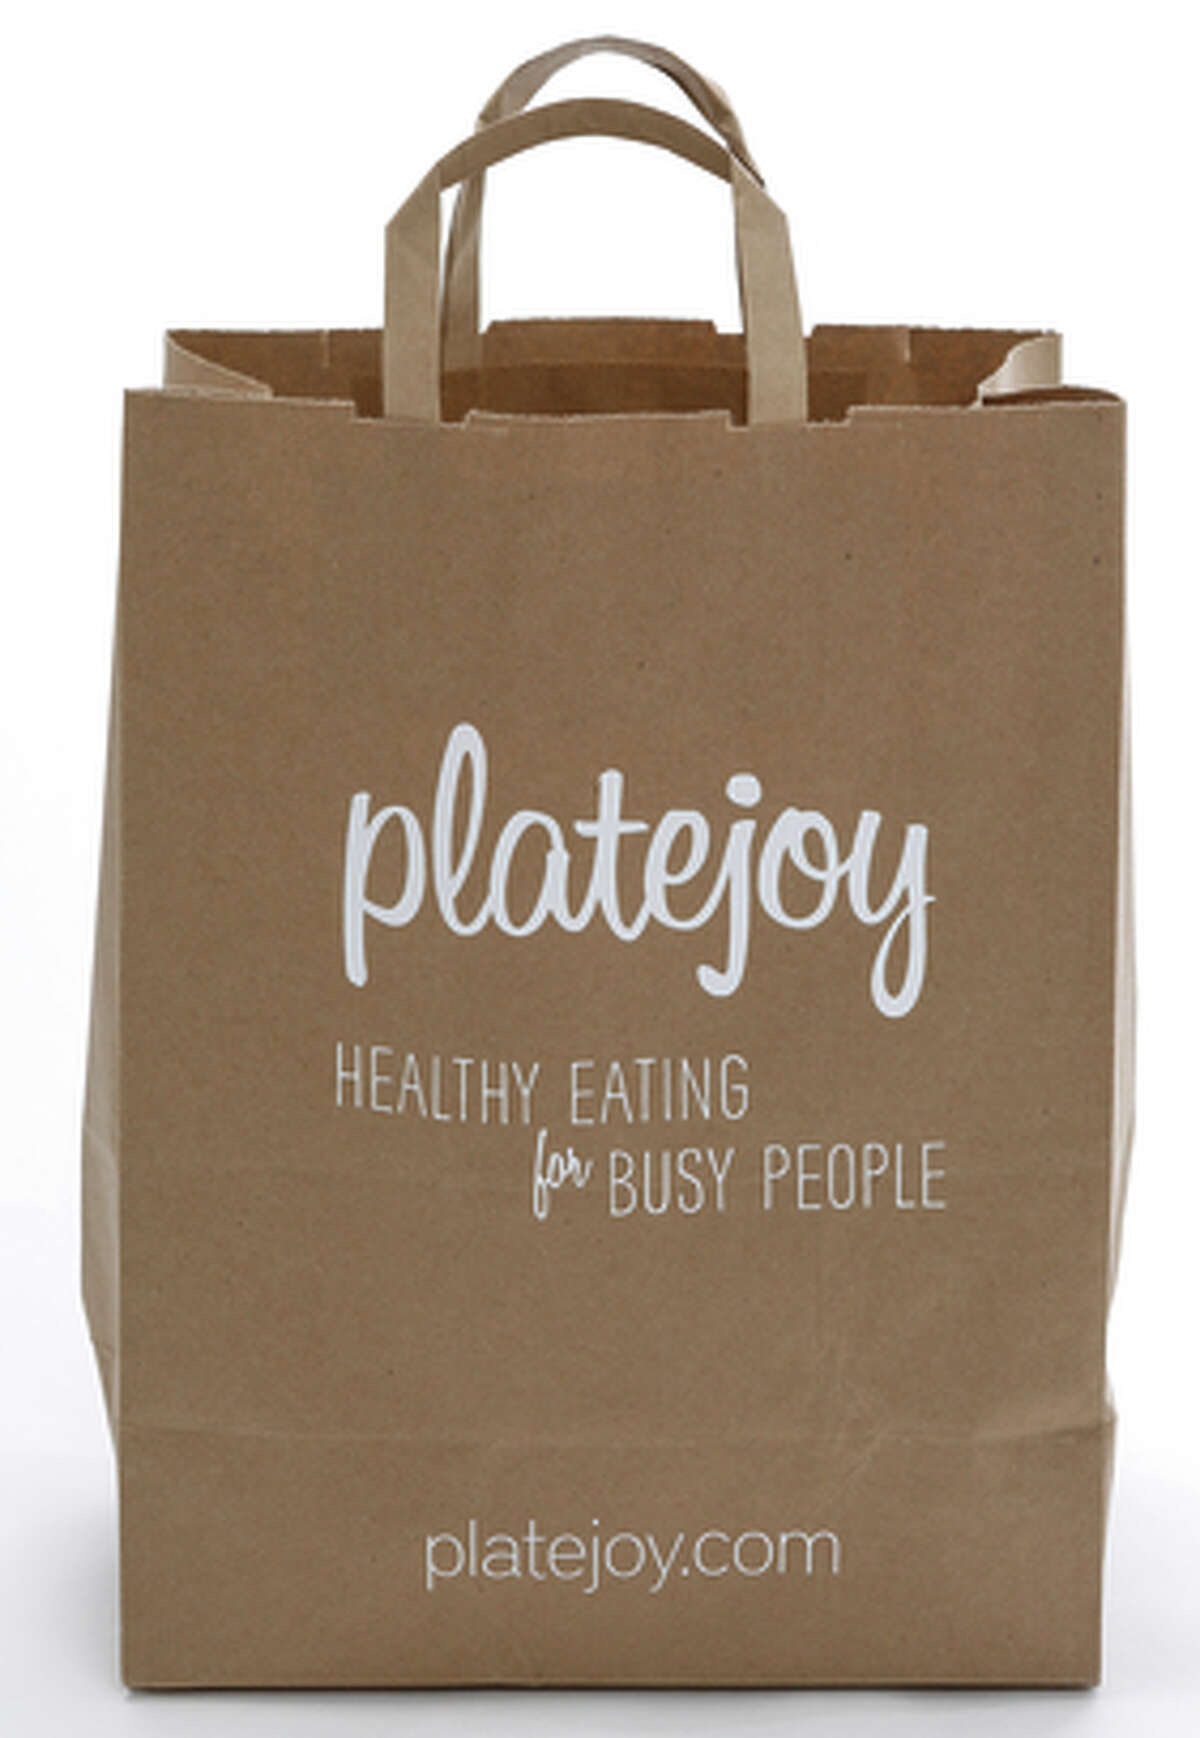 A meal kit from Platejoy.